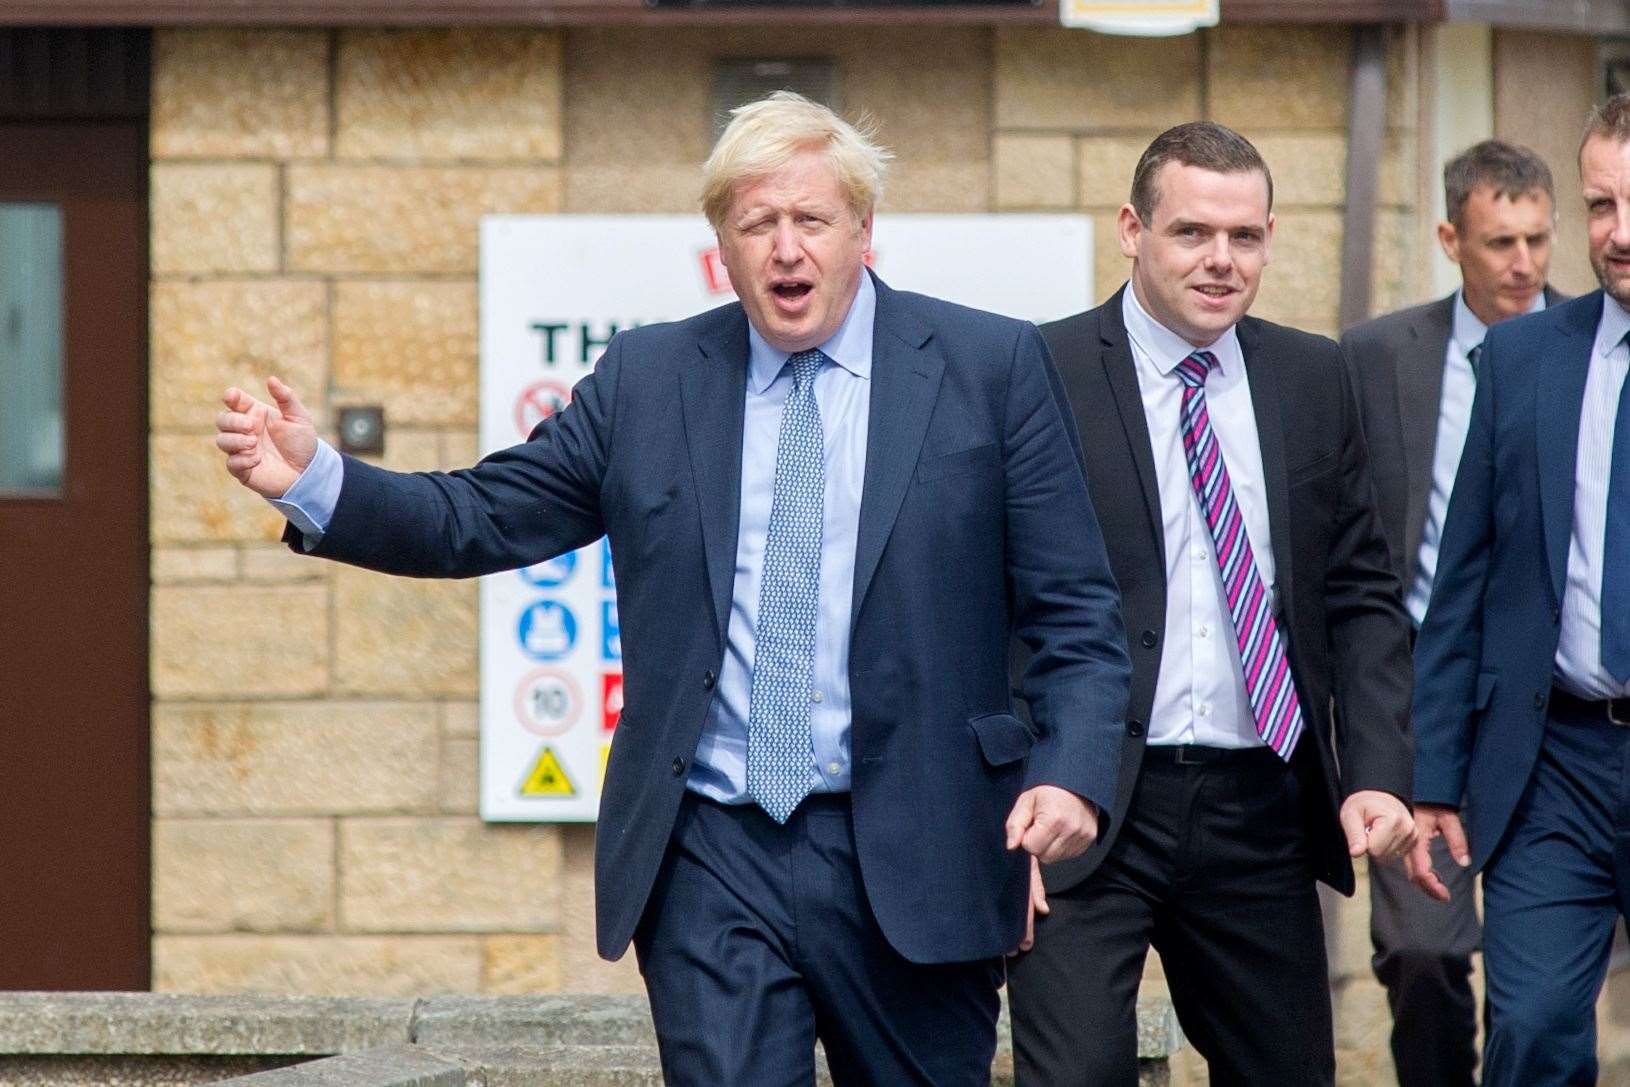 Douglas Ross has called for Prime Minister Boris Johnson (front) to resign off the back of admitting he attended a party at 10 Downing Street.